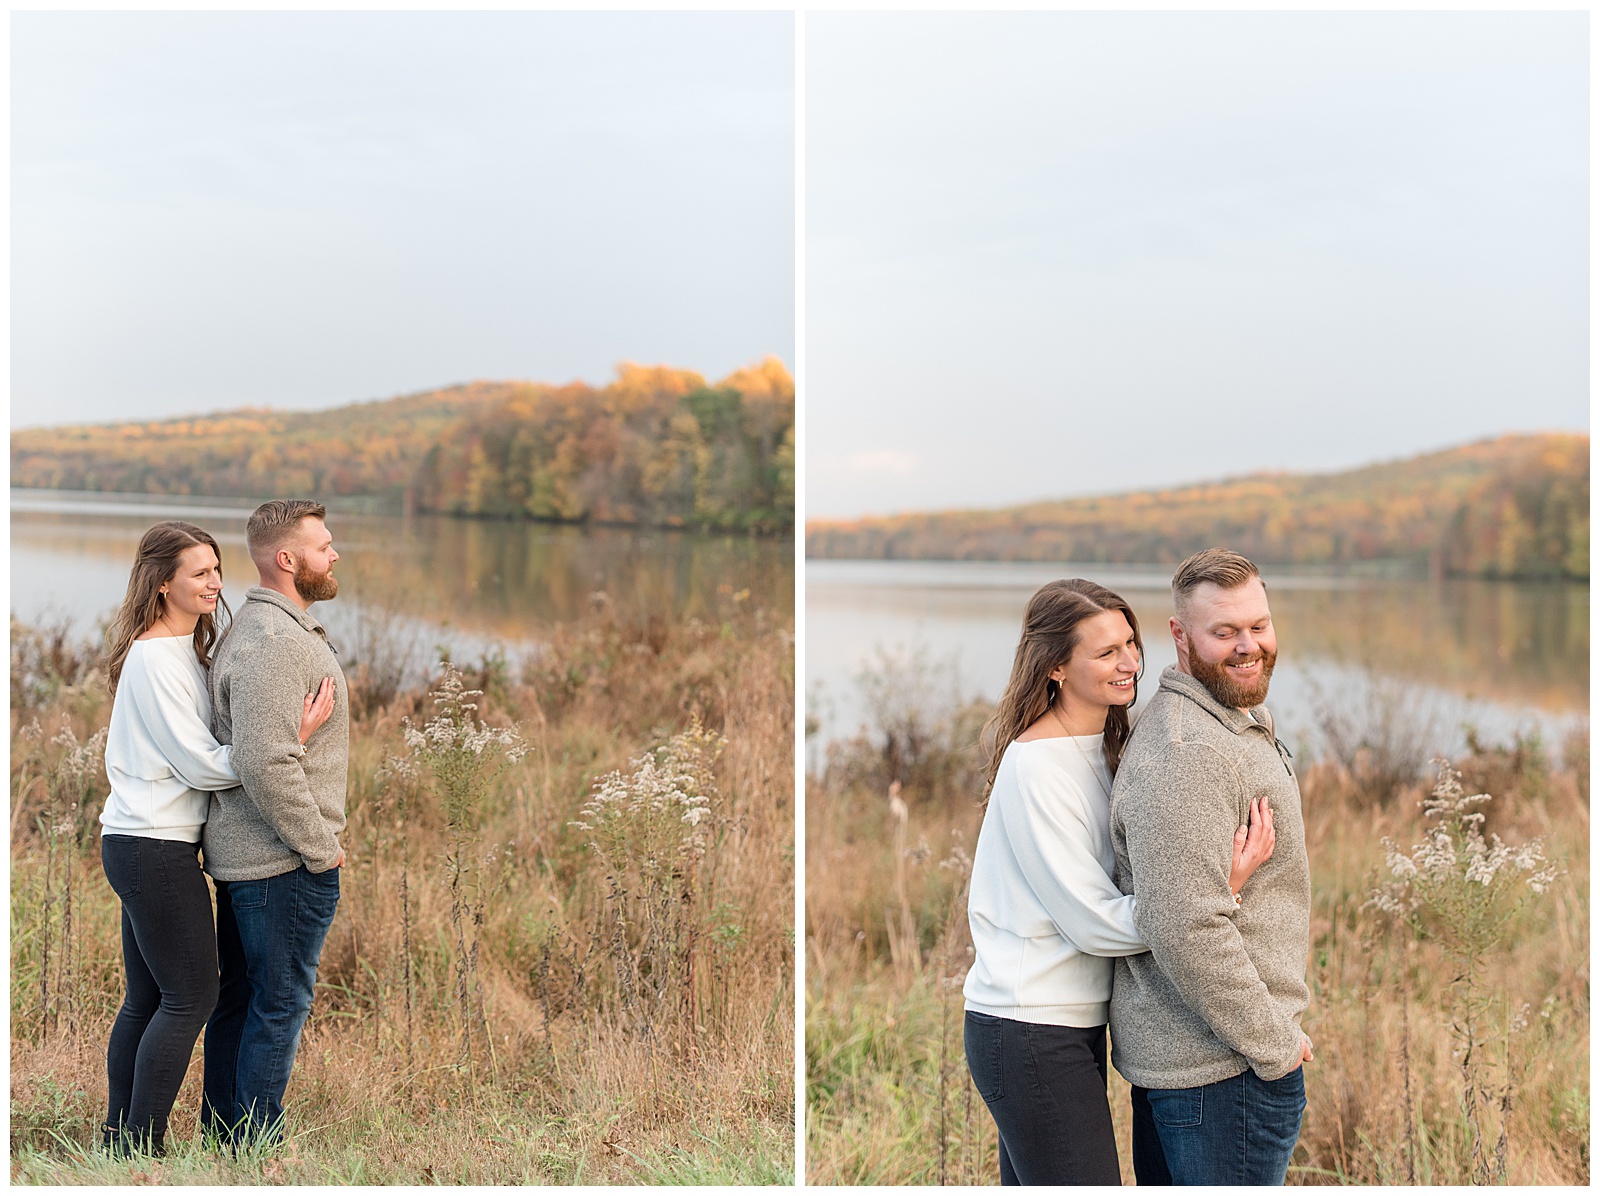 girl hugging guy from behind as they both smile on colorful fall day by wild grasses beside lake